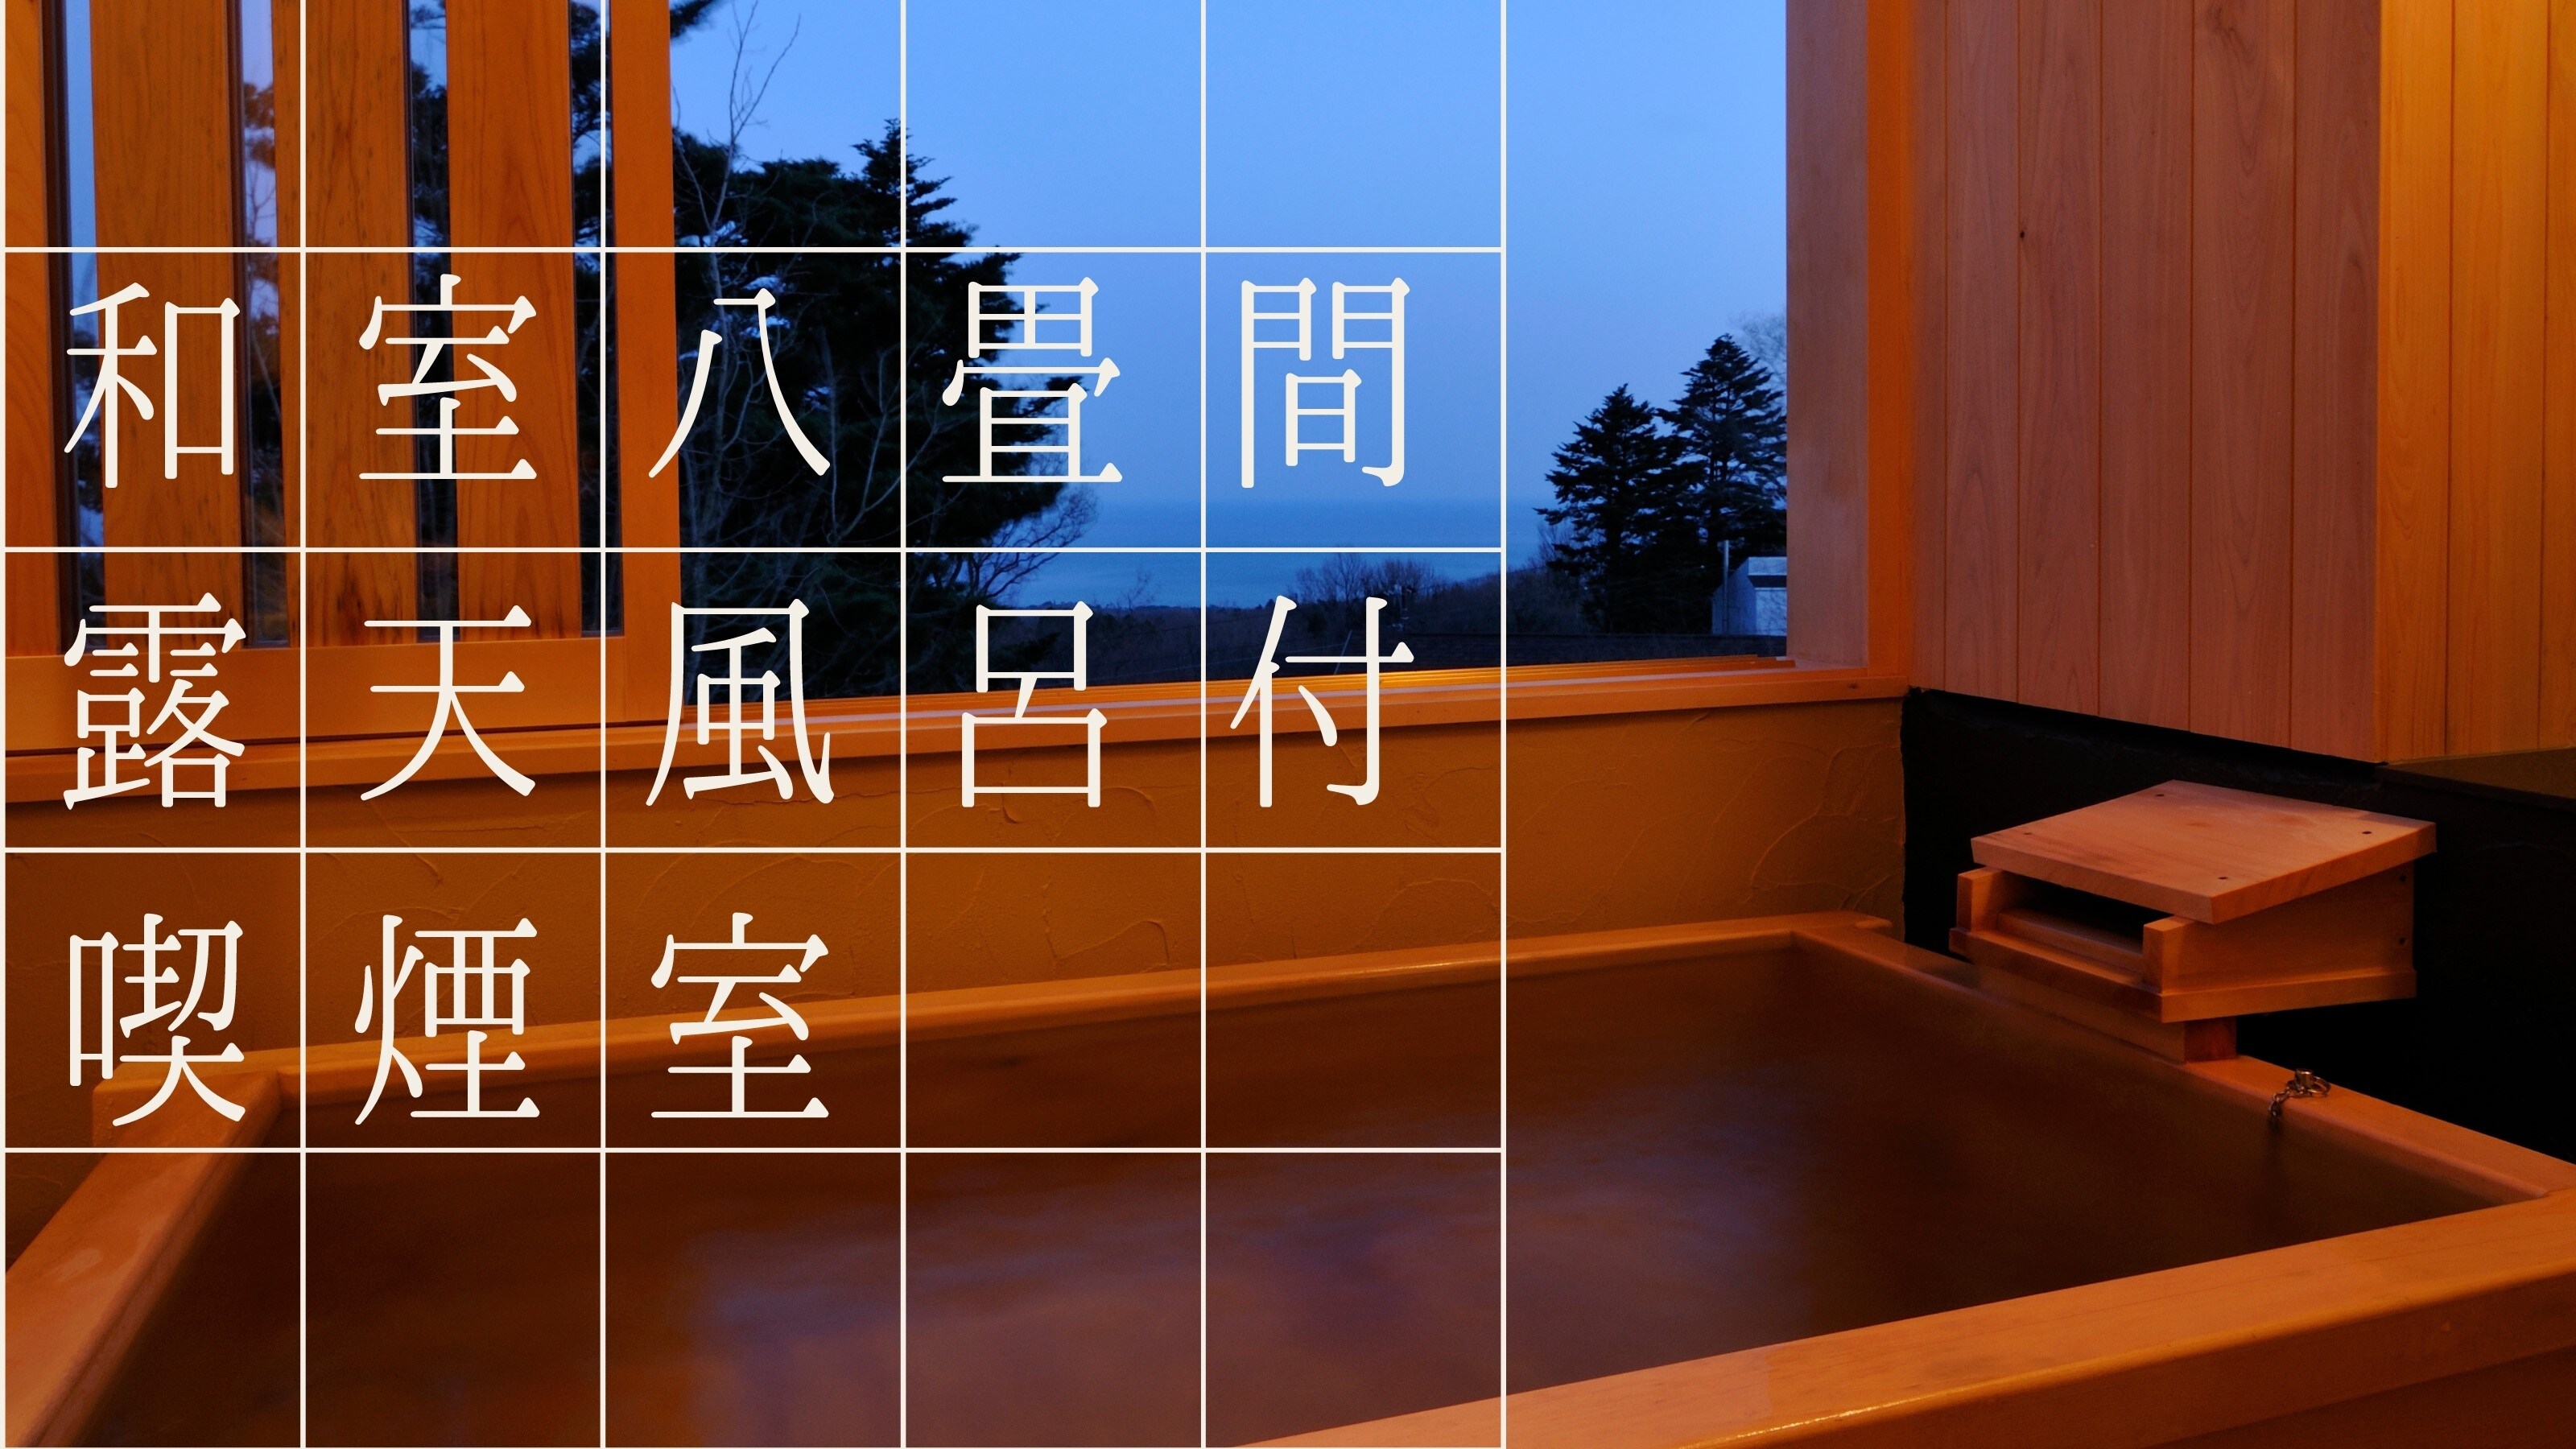 Japanese-style room with 8 tatami mats, smoking room with open-air bath